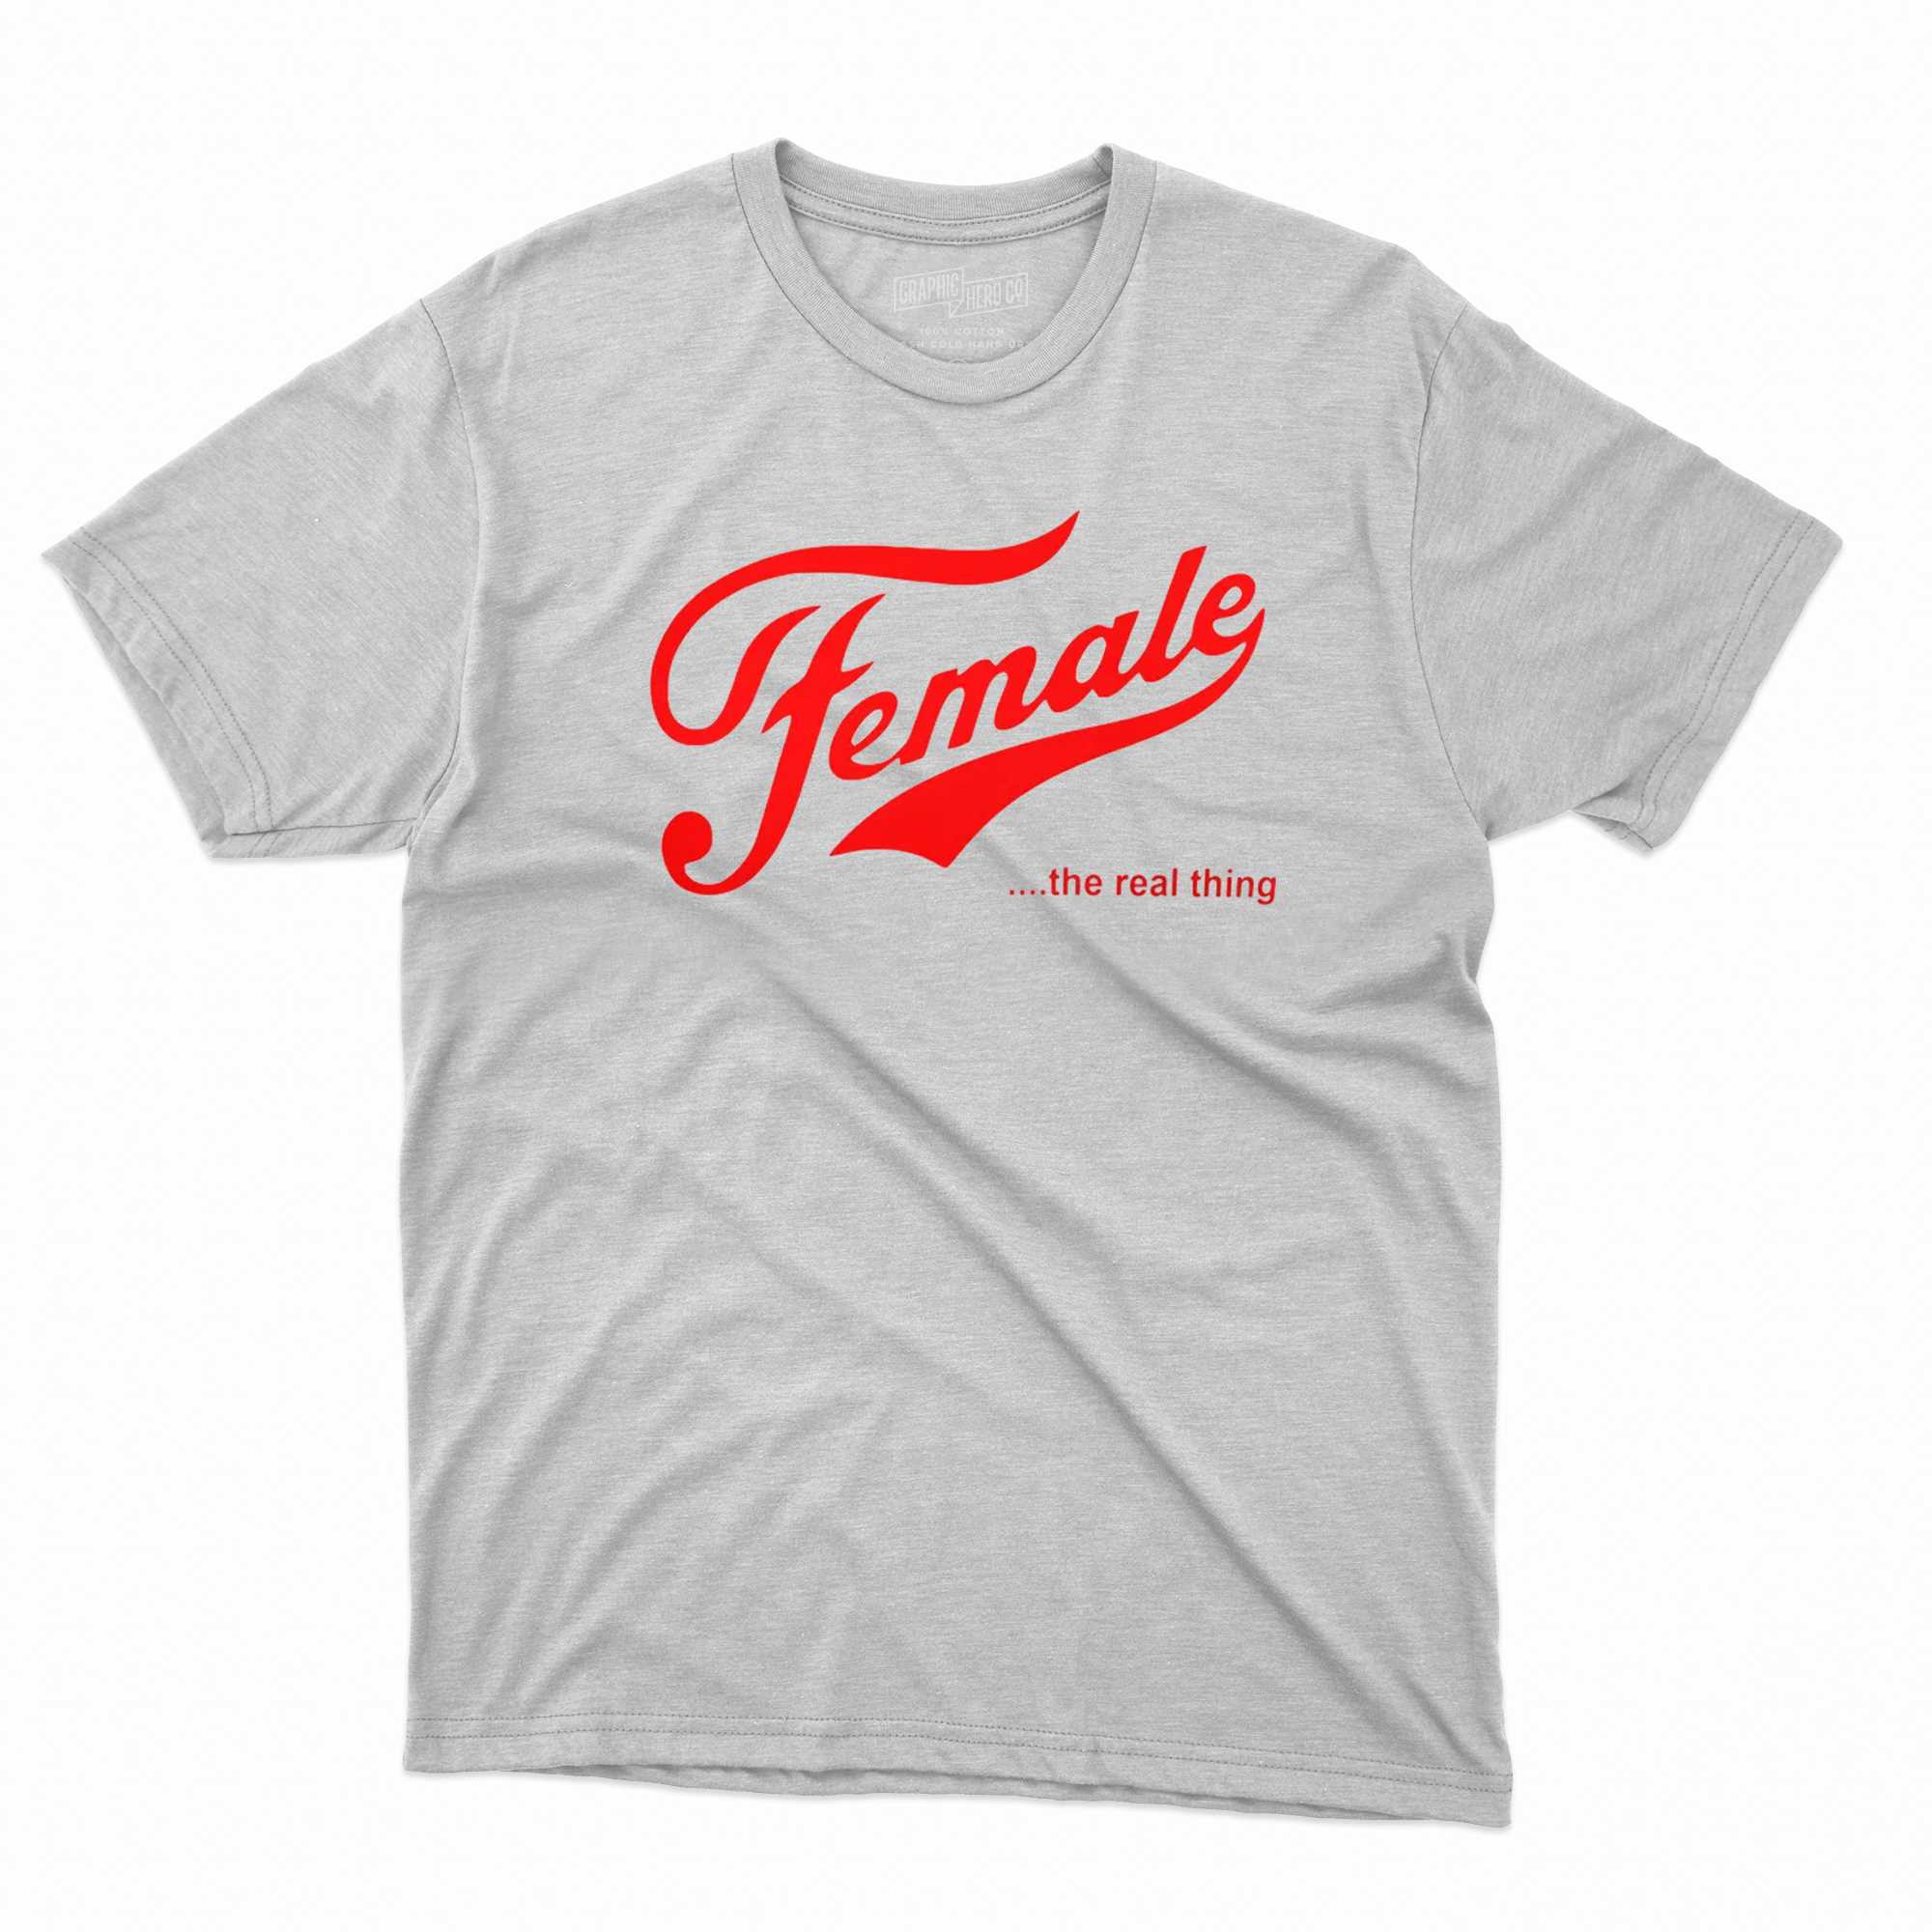 female the real thing shirt 1 1